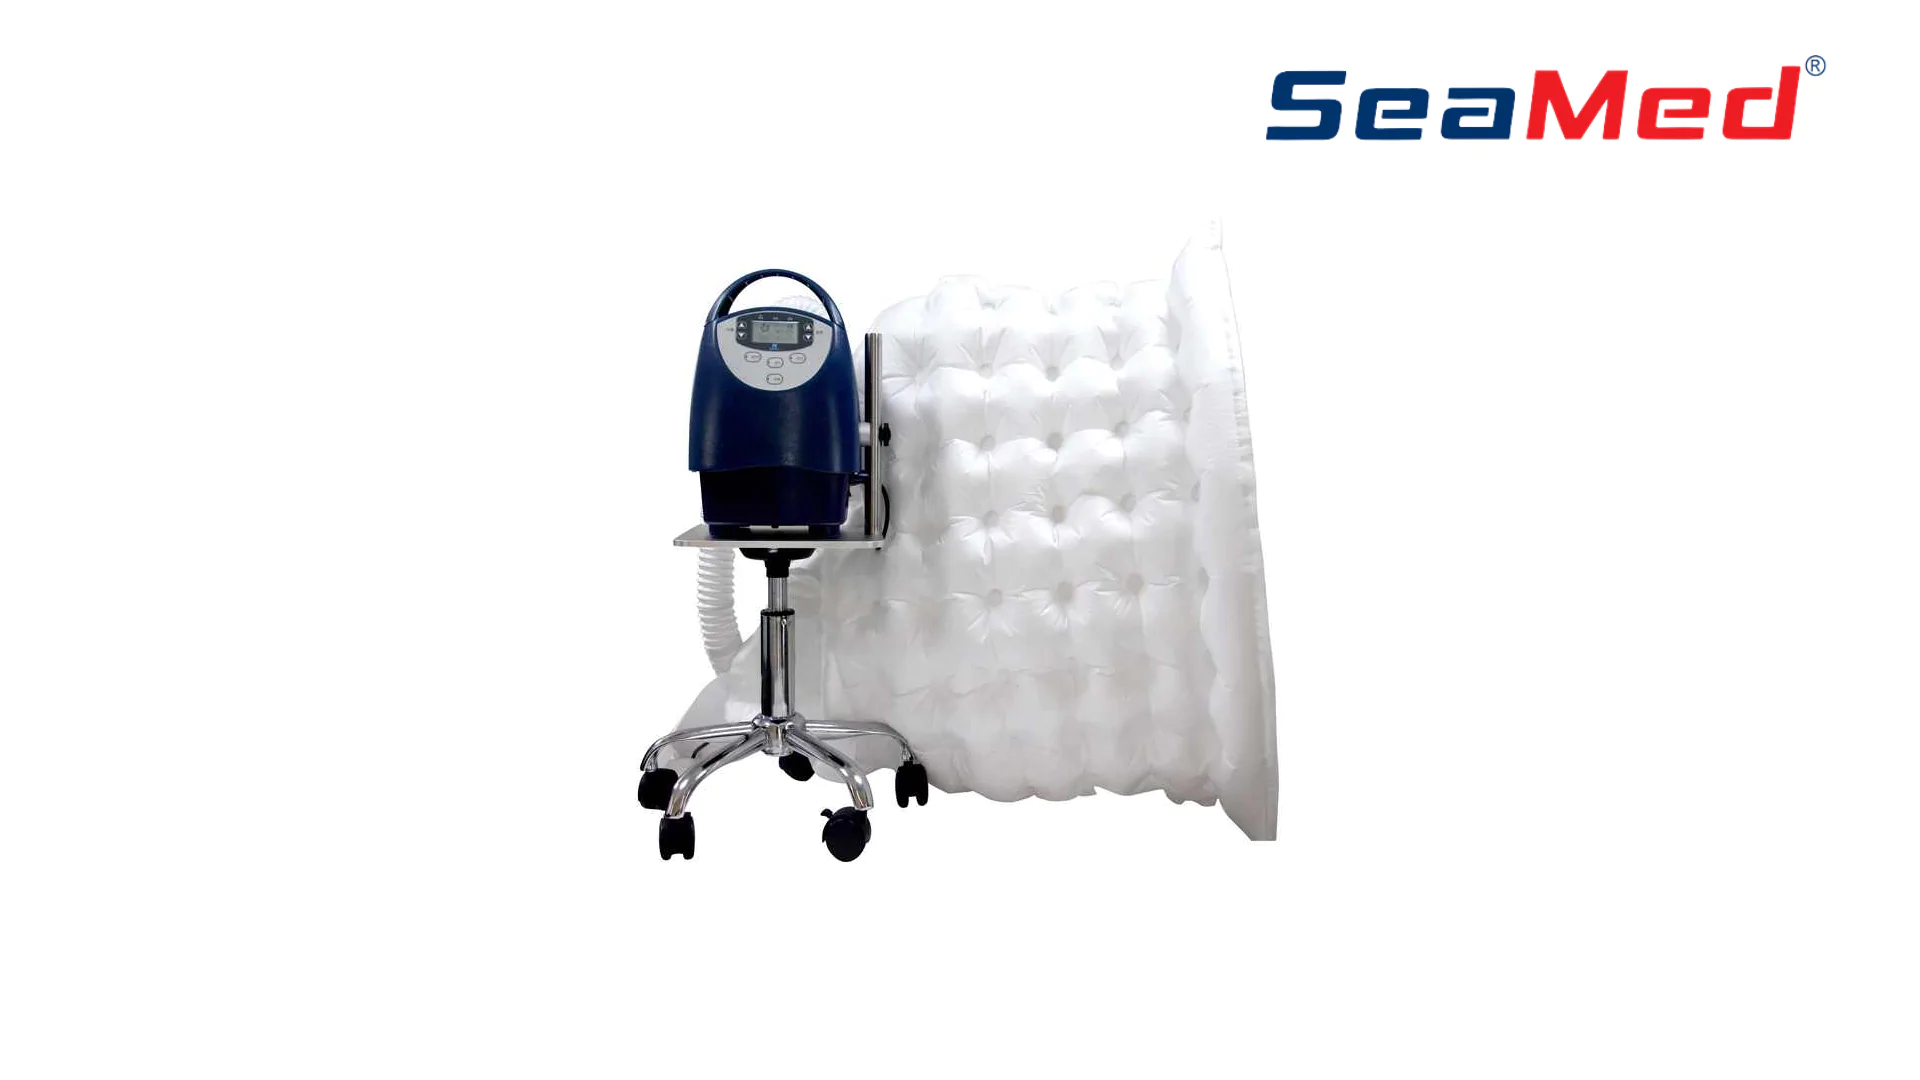 SEAMED PATIENT WARMING DEVICE